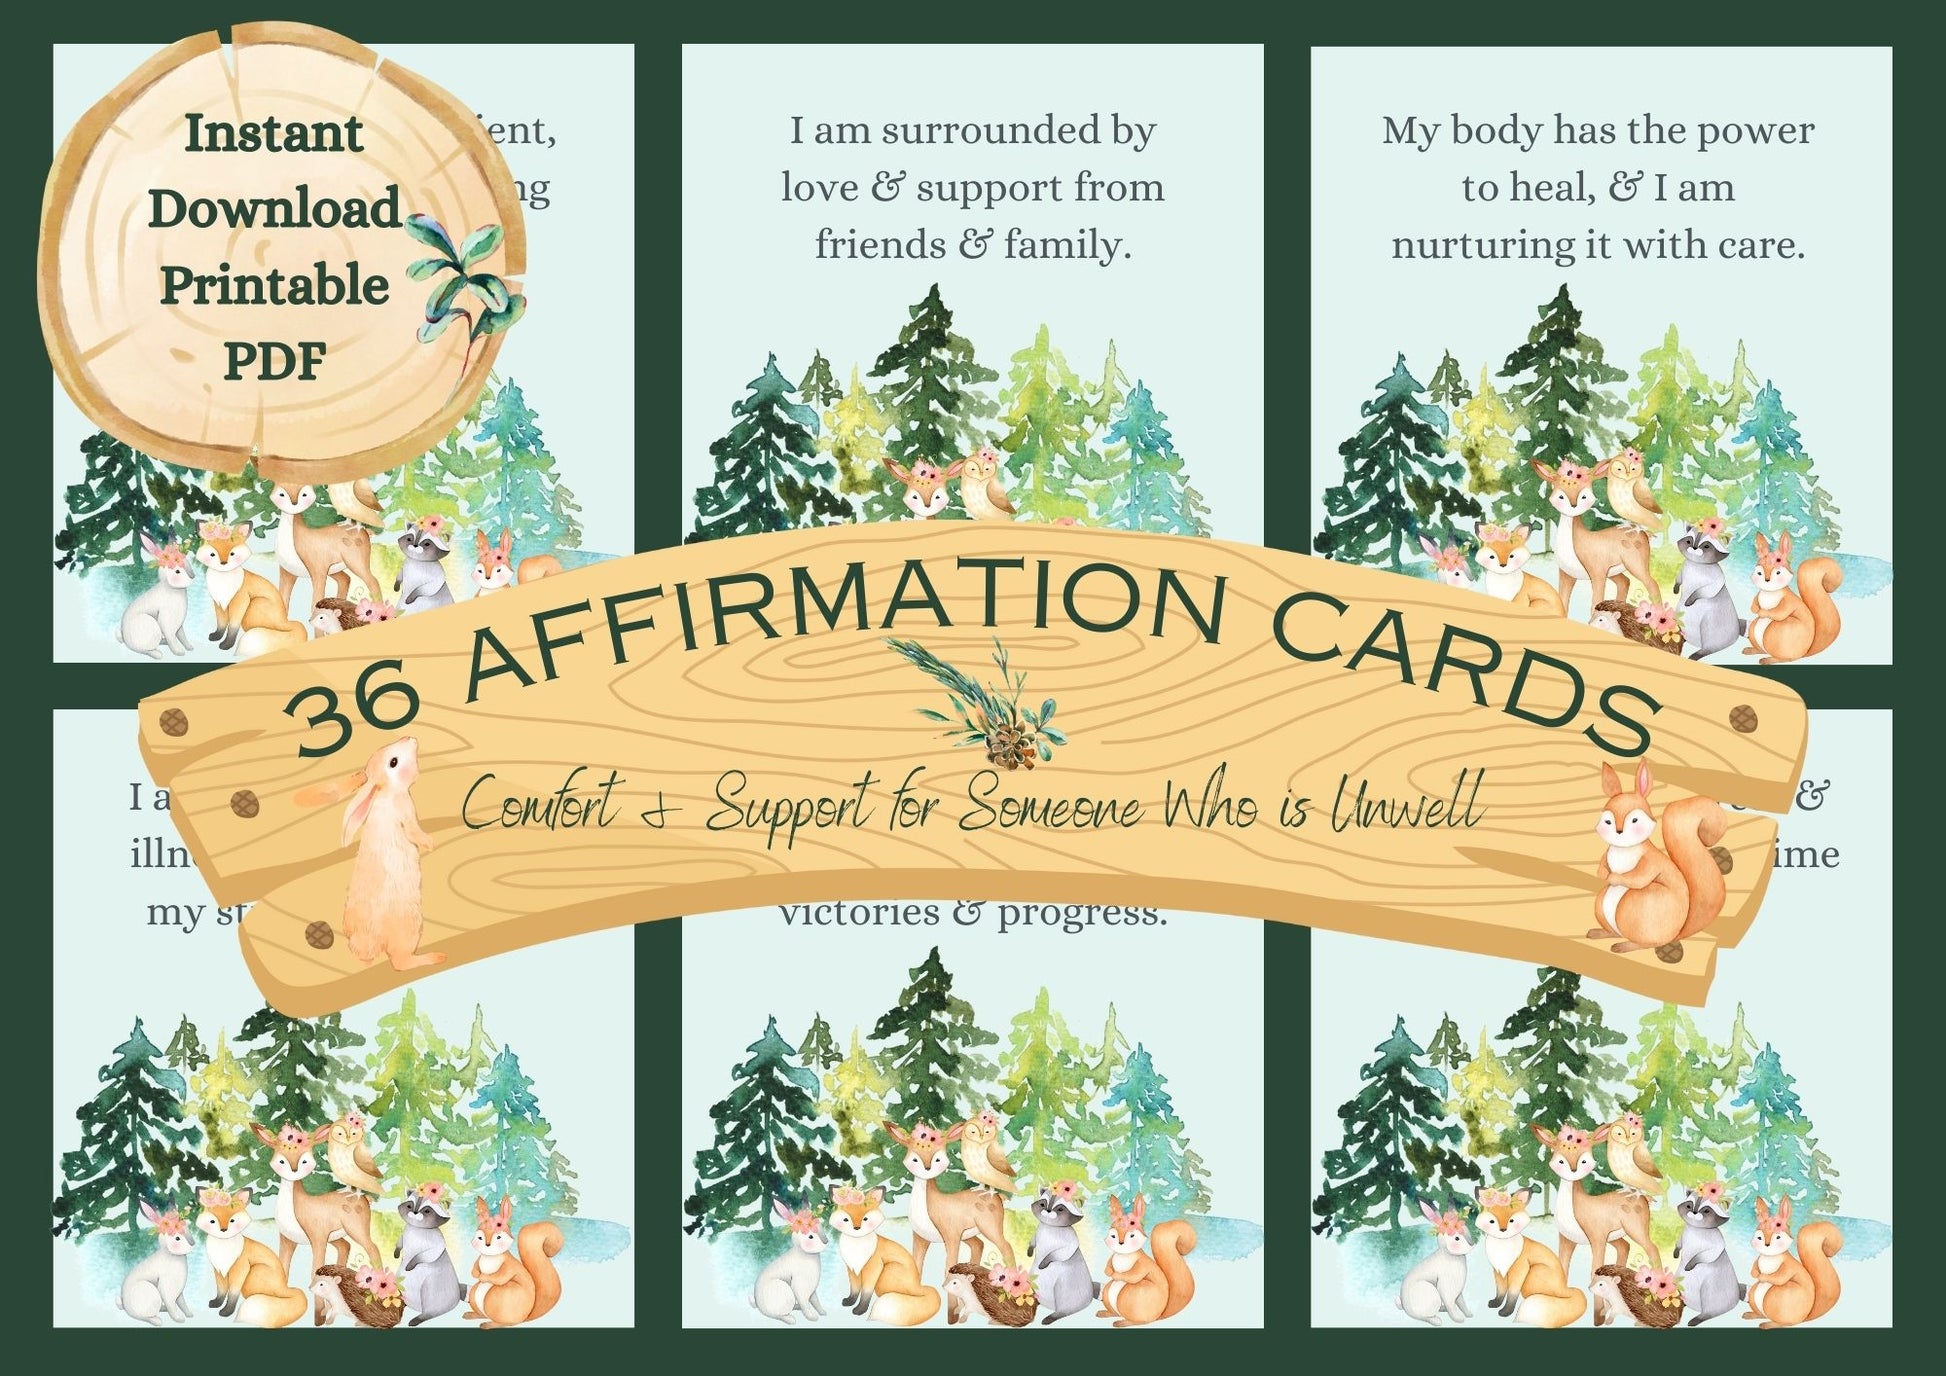 Quality Matters: The ultimate quality of these affirmation cards is in your hands. For the best experience, we recommend printing them on thick, high-quality white cardstock. Laminating them, if possible, ensures they remain durable and cherished keepsakes.